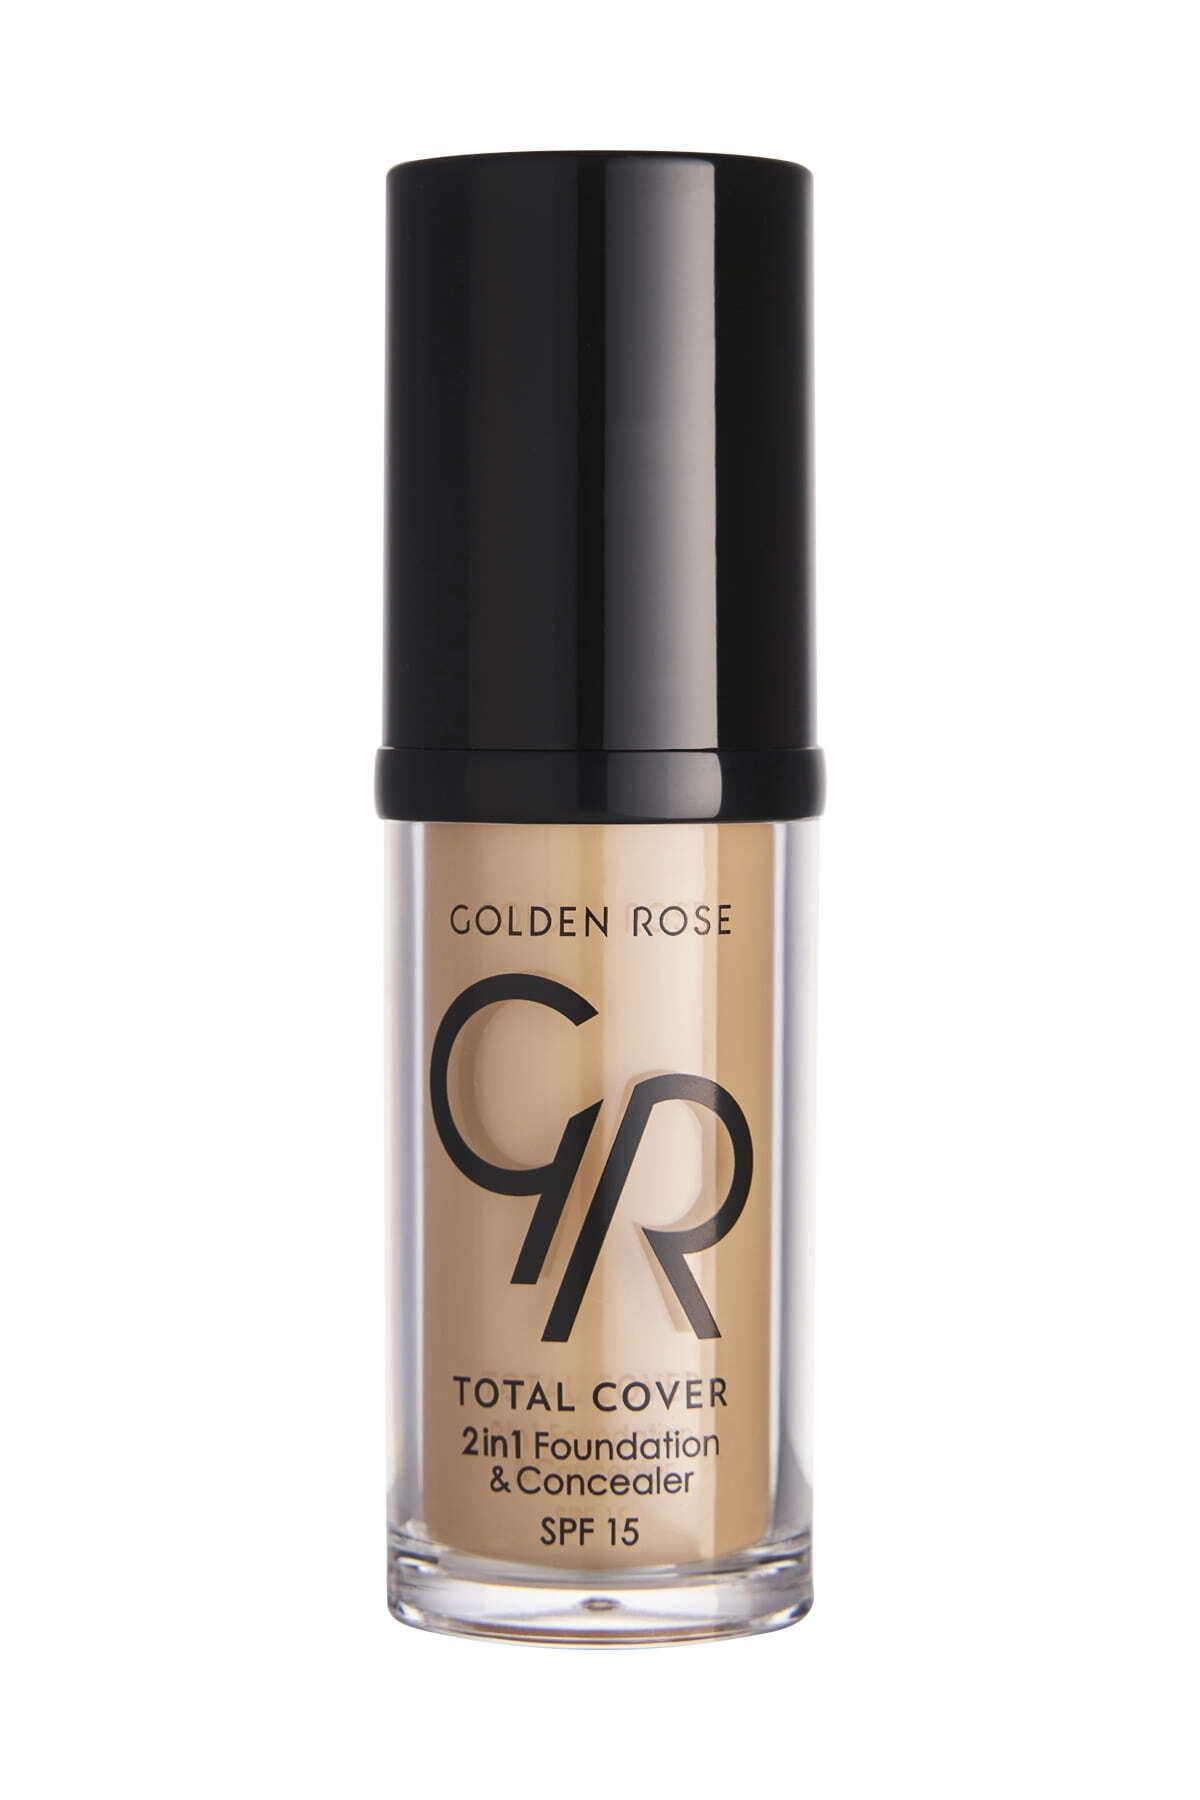 GOLDEN ROSE TOTAL COVER 2IN1 FOUND.& CONC.NO:022